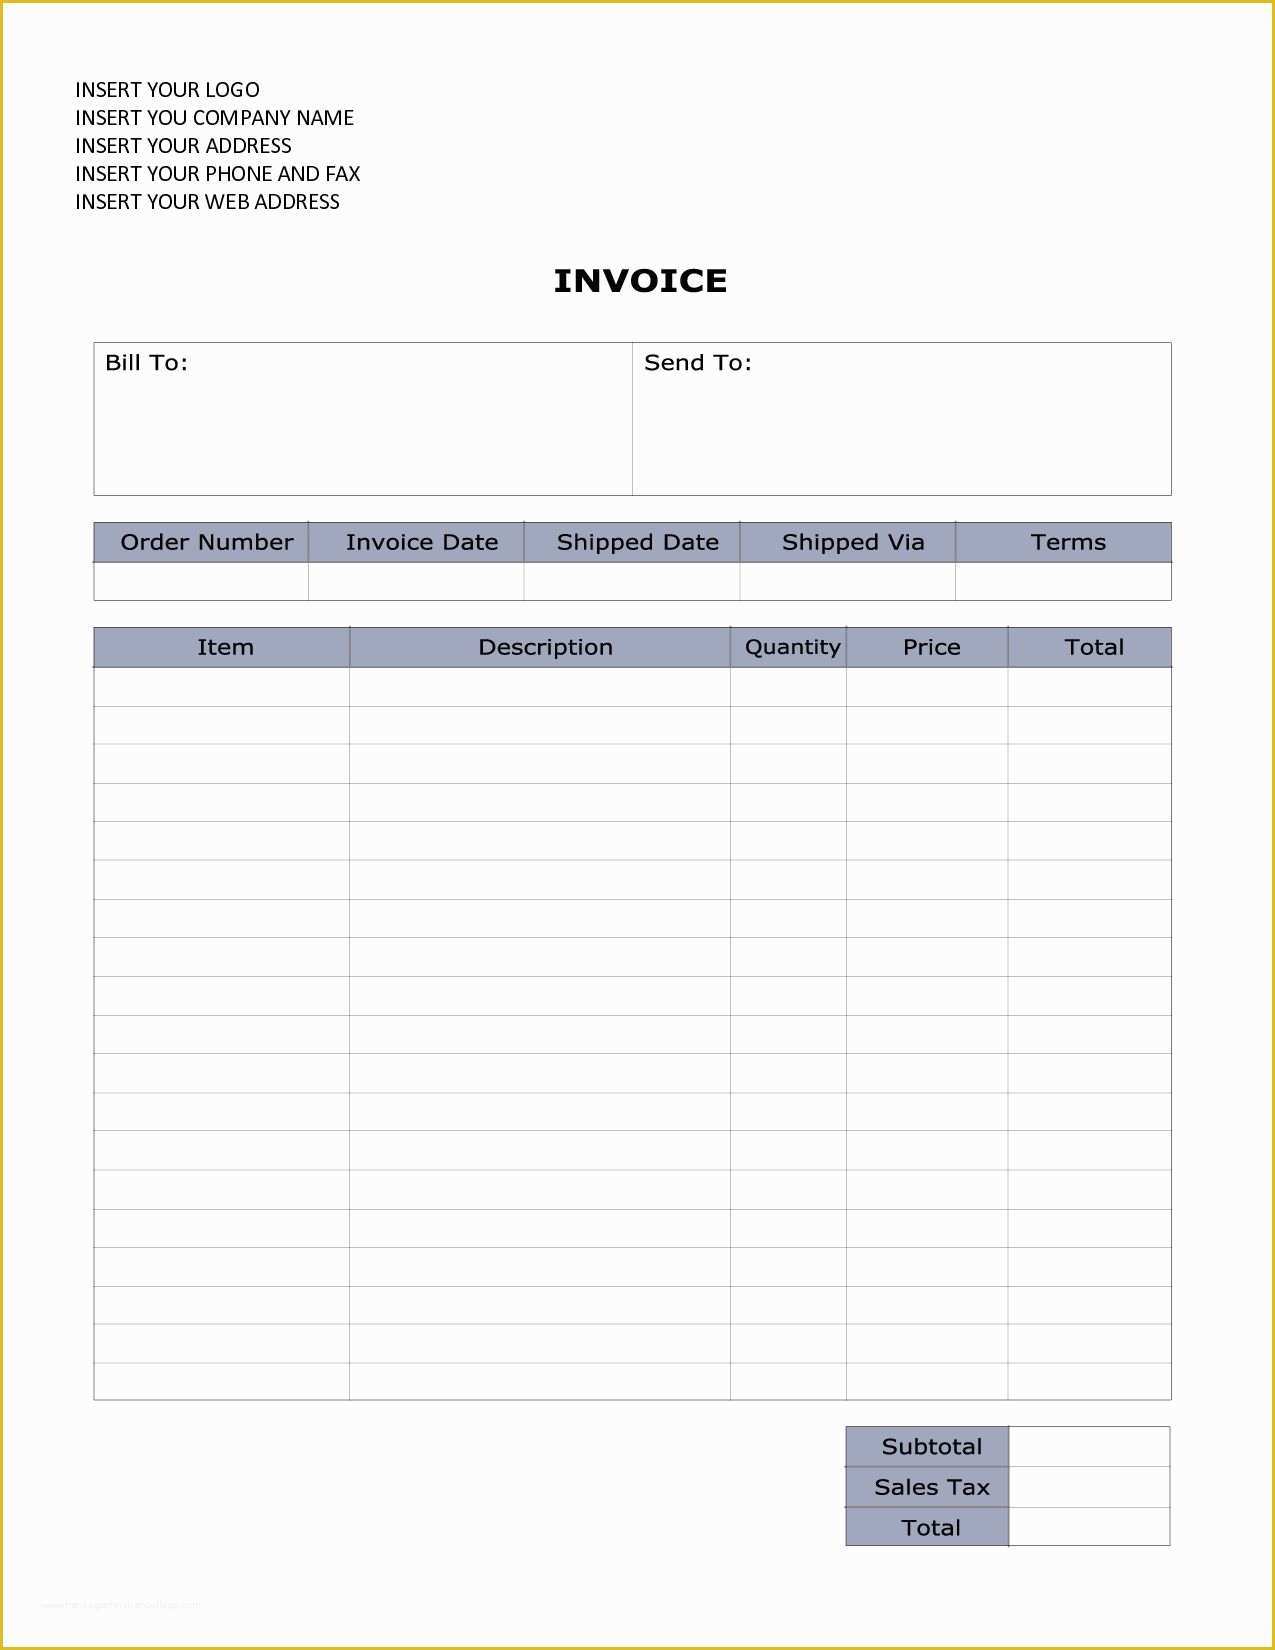 Free Sales Invoice Template Word Of Word Document Invoice Template Sales Invoice Sample Word